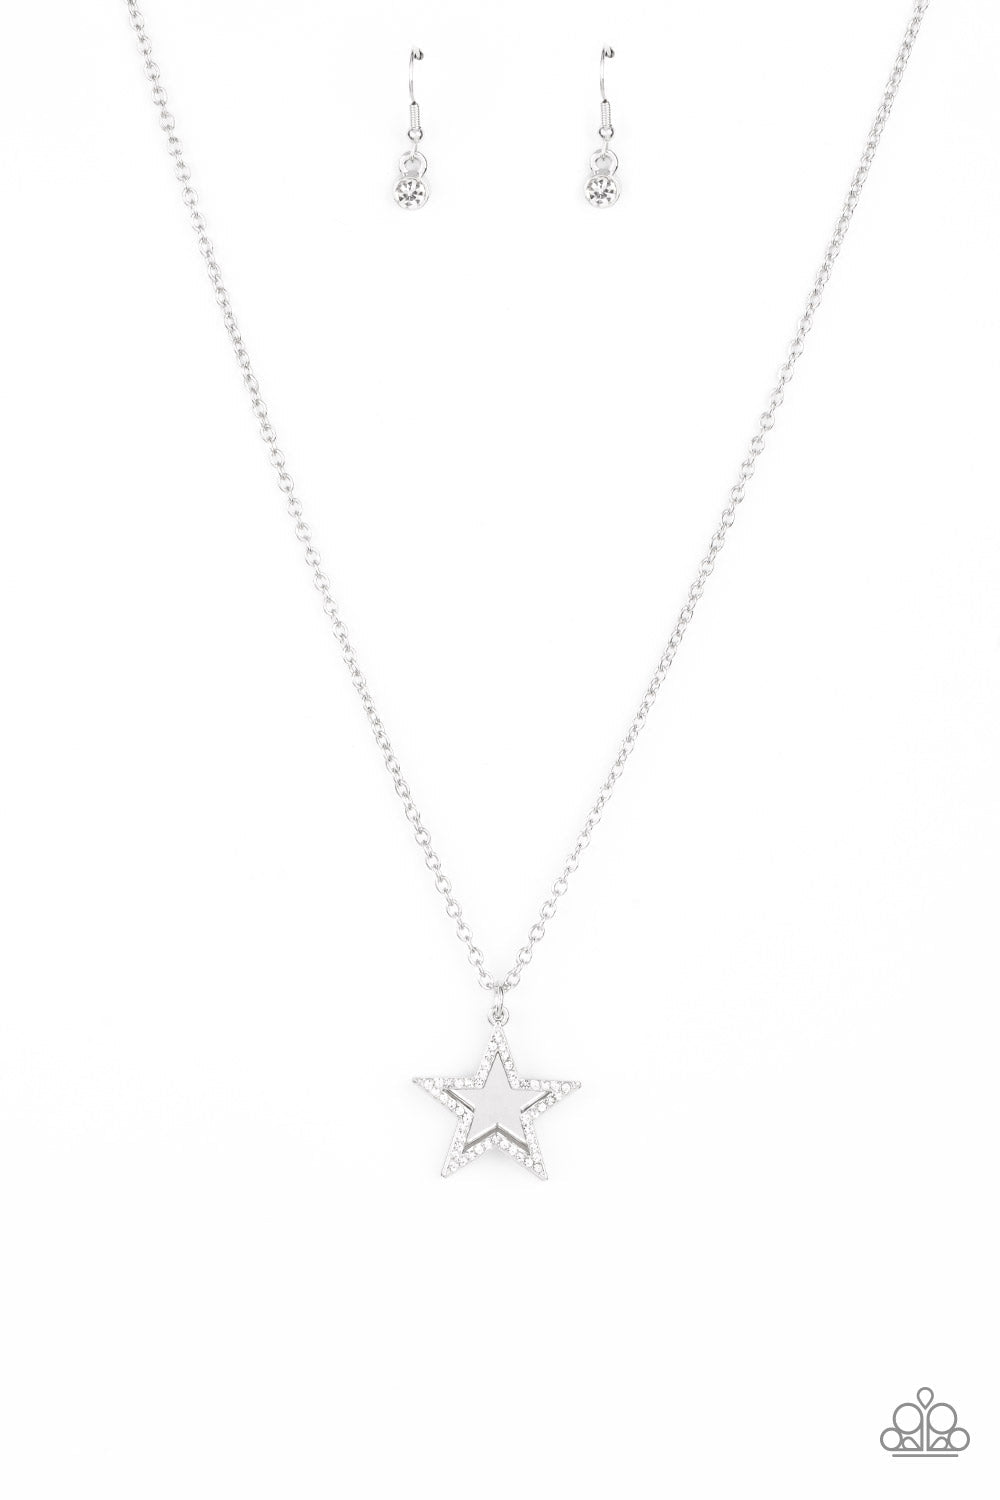 American Anthem - White Rhinestone Encrusted Silver Star Pendant Paparazzi Necklace & matching earrings